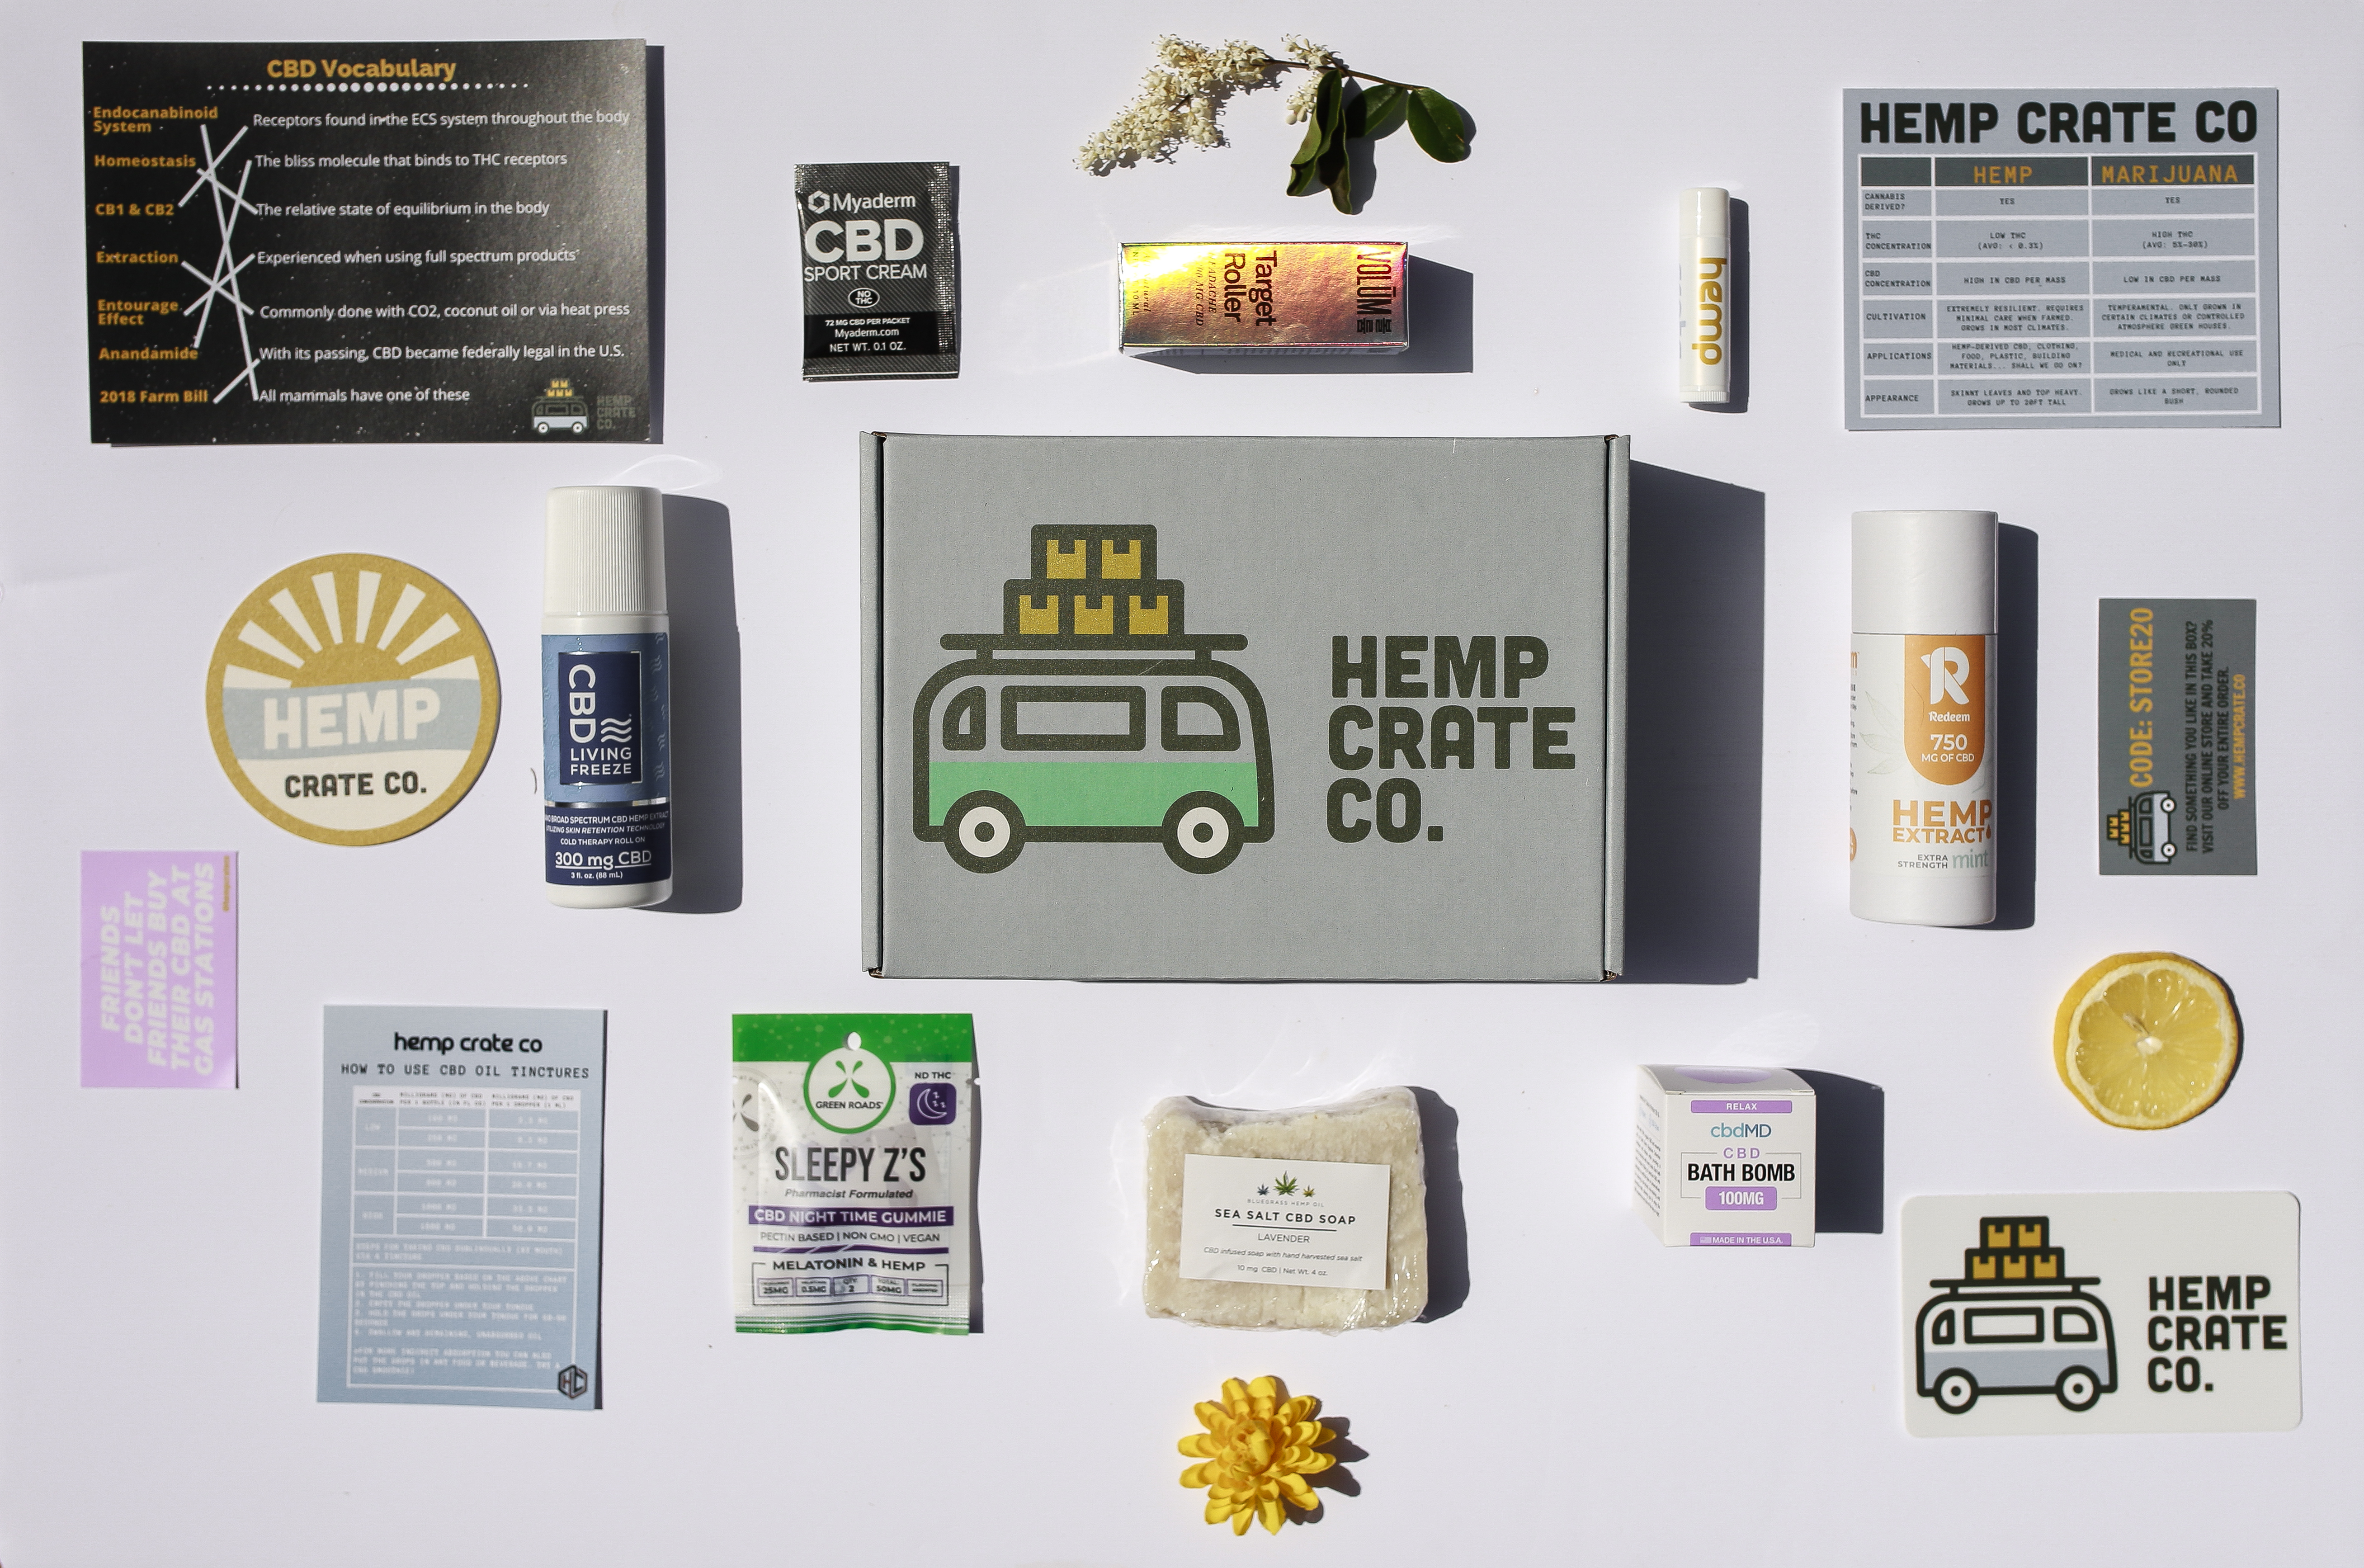 Curious about CBD? Check out Hemp Crate Co.